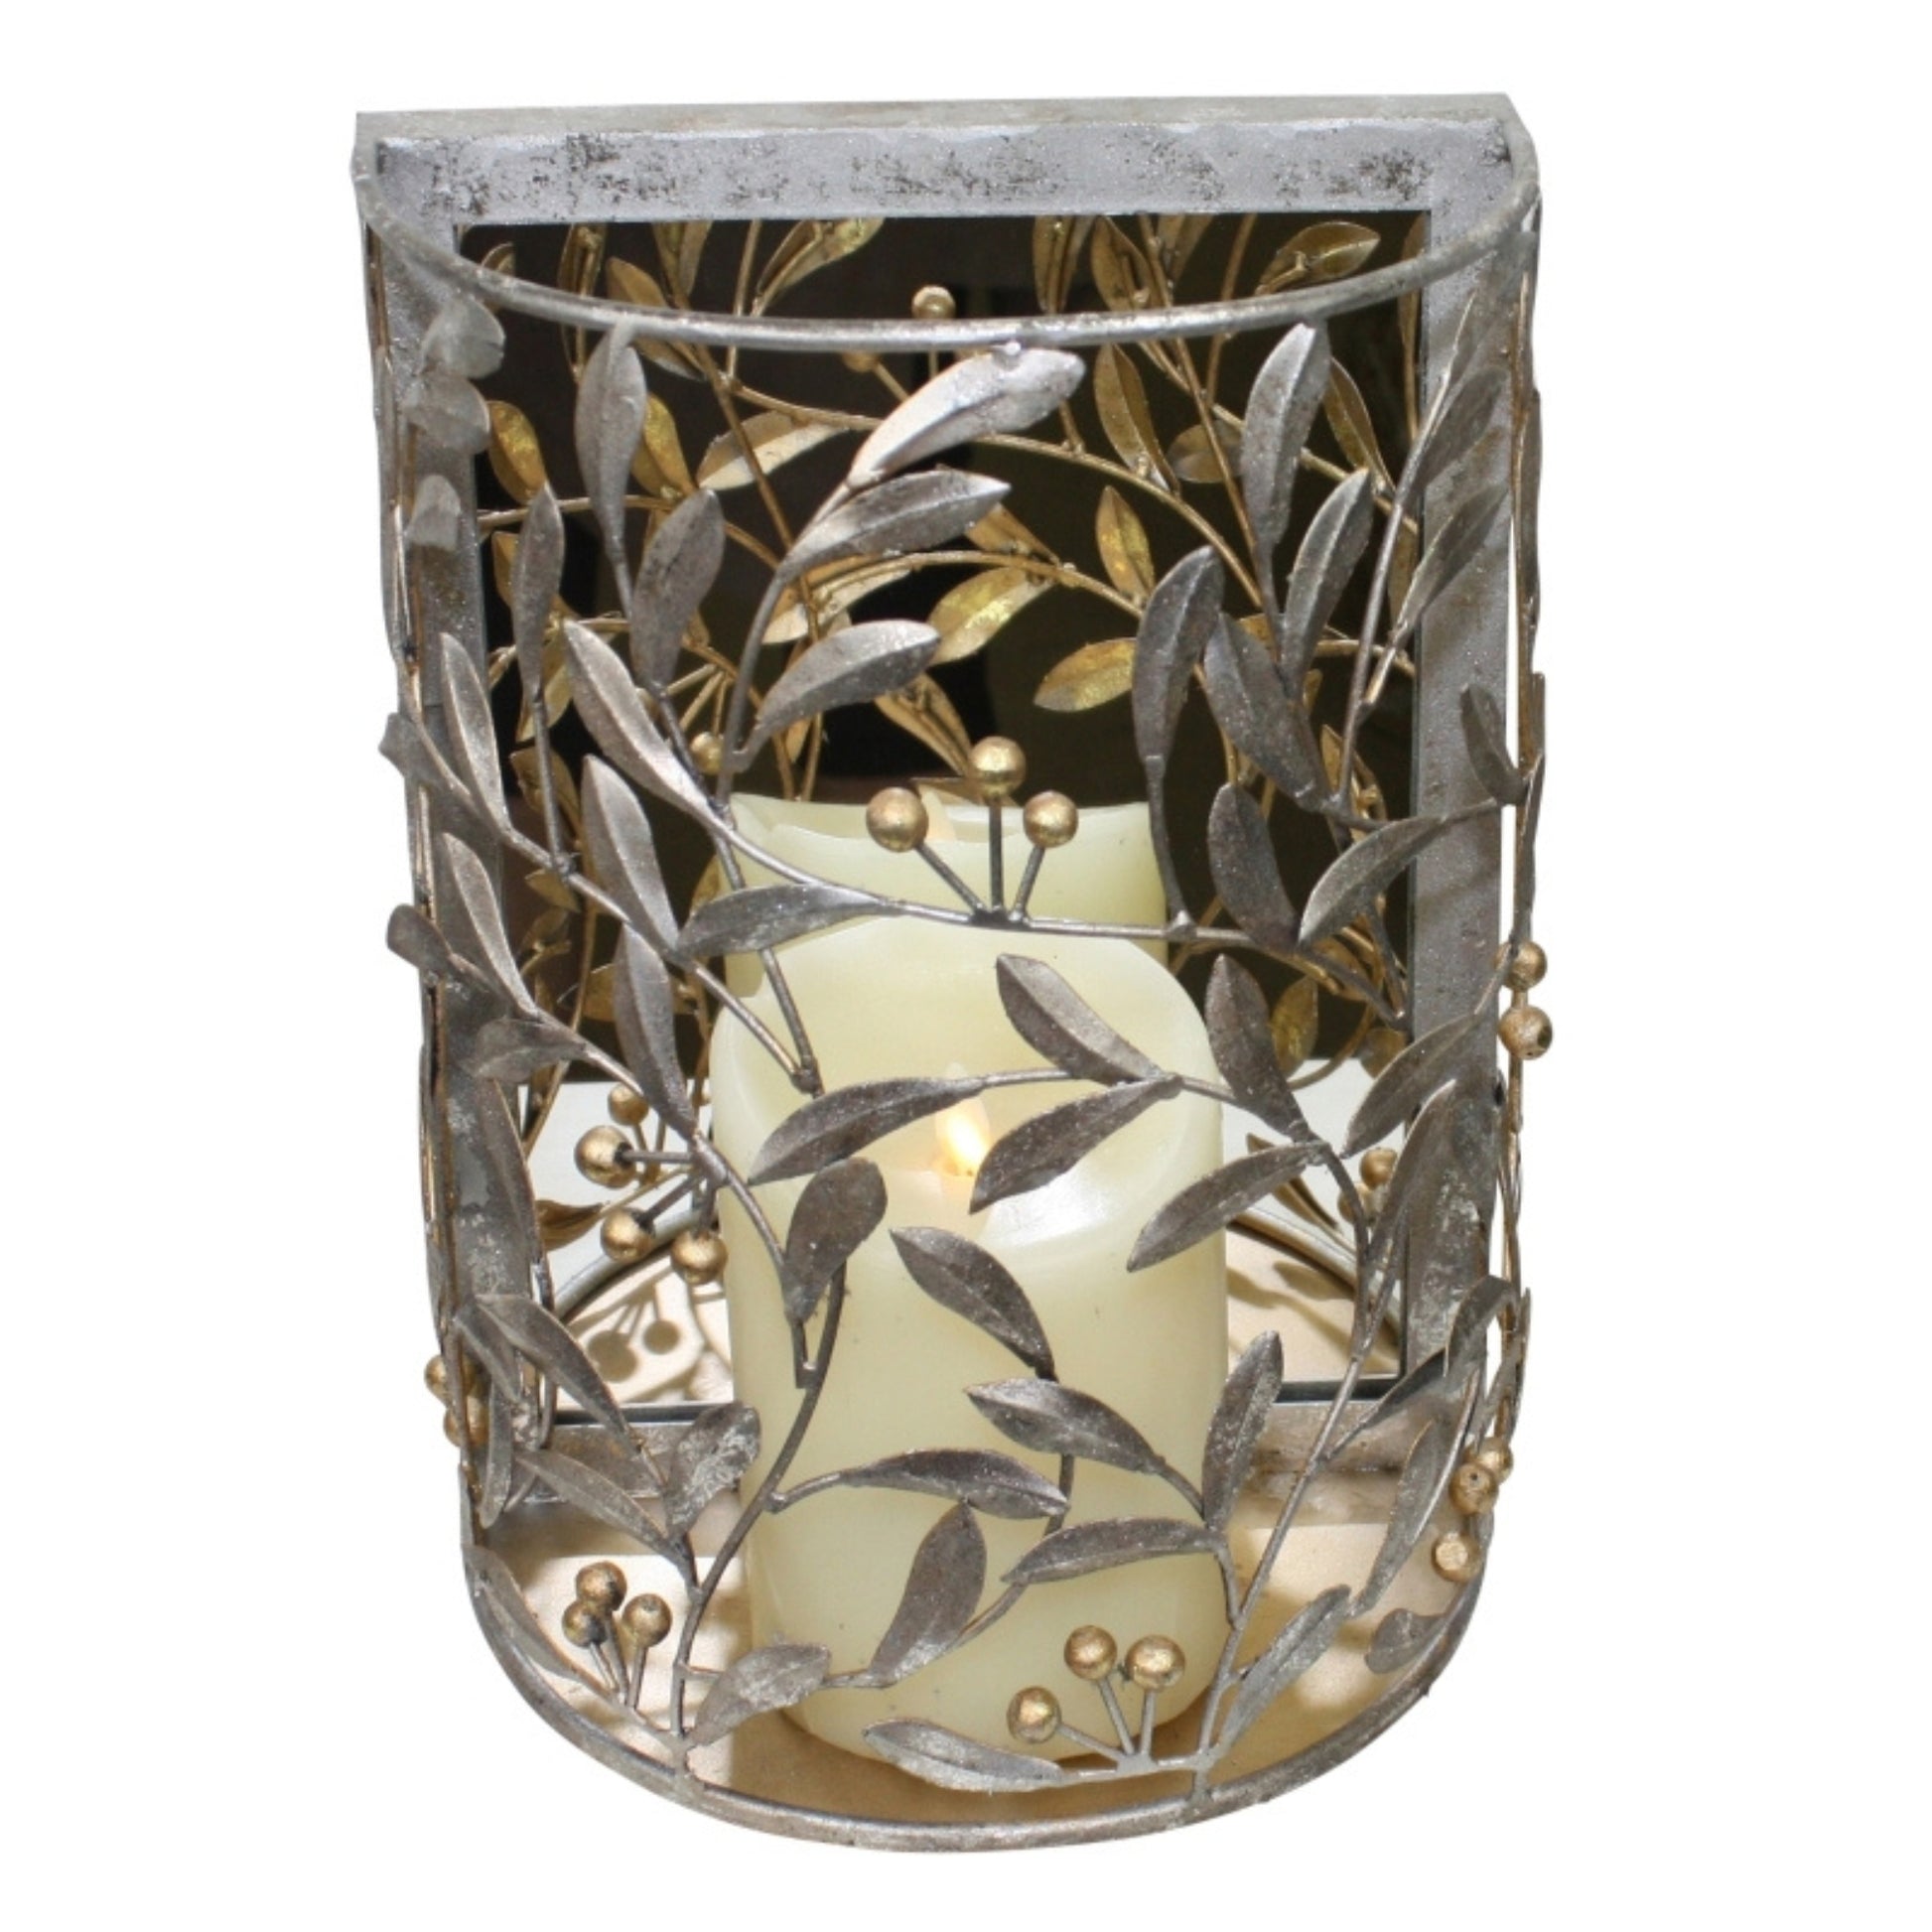 Silver and Gold Iron Wall Sconce - Leaf & Berry Accented Iron & Tole Candle Holder with Mirrored Back | INSIDE OUT | InsideOutCatalog.com